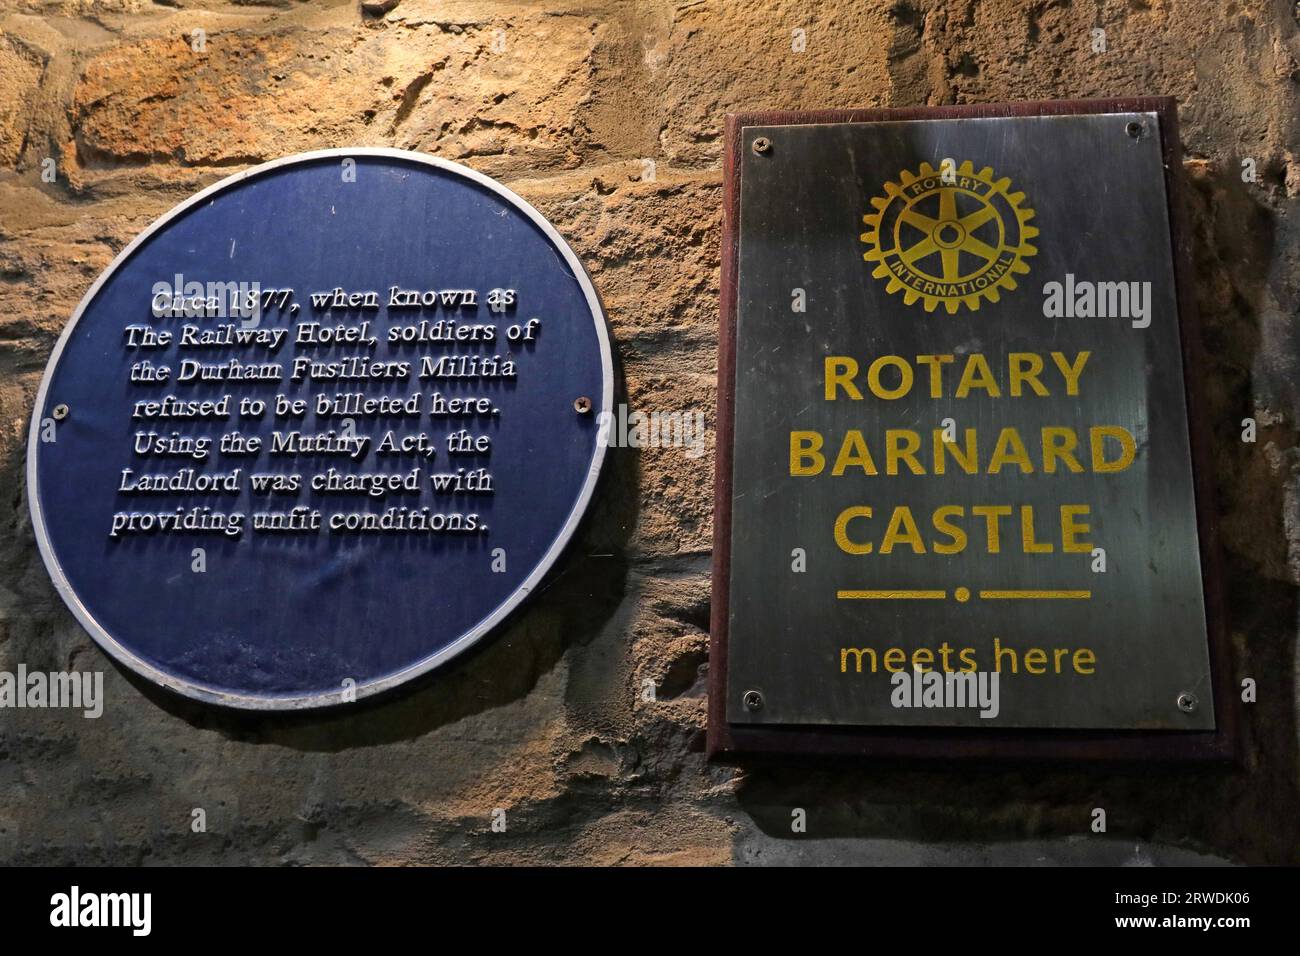 Rotary at The Old Well Inn, 21 The Bank, Barnard Castle, Teesdale, County Durham, England, UK, DL12 8PH Stock Photo